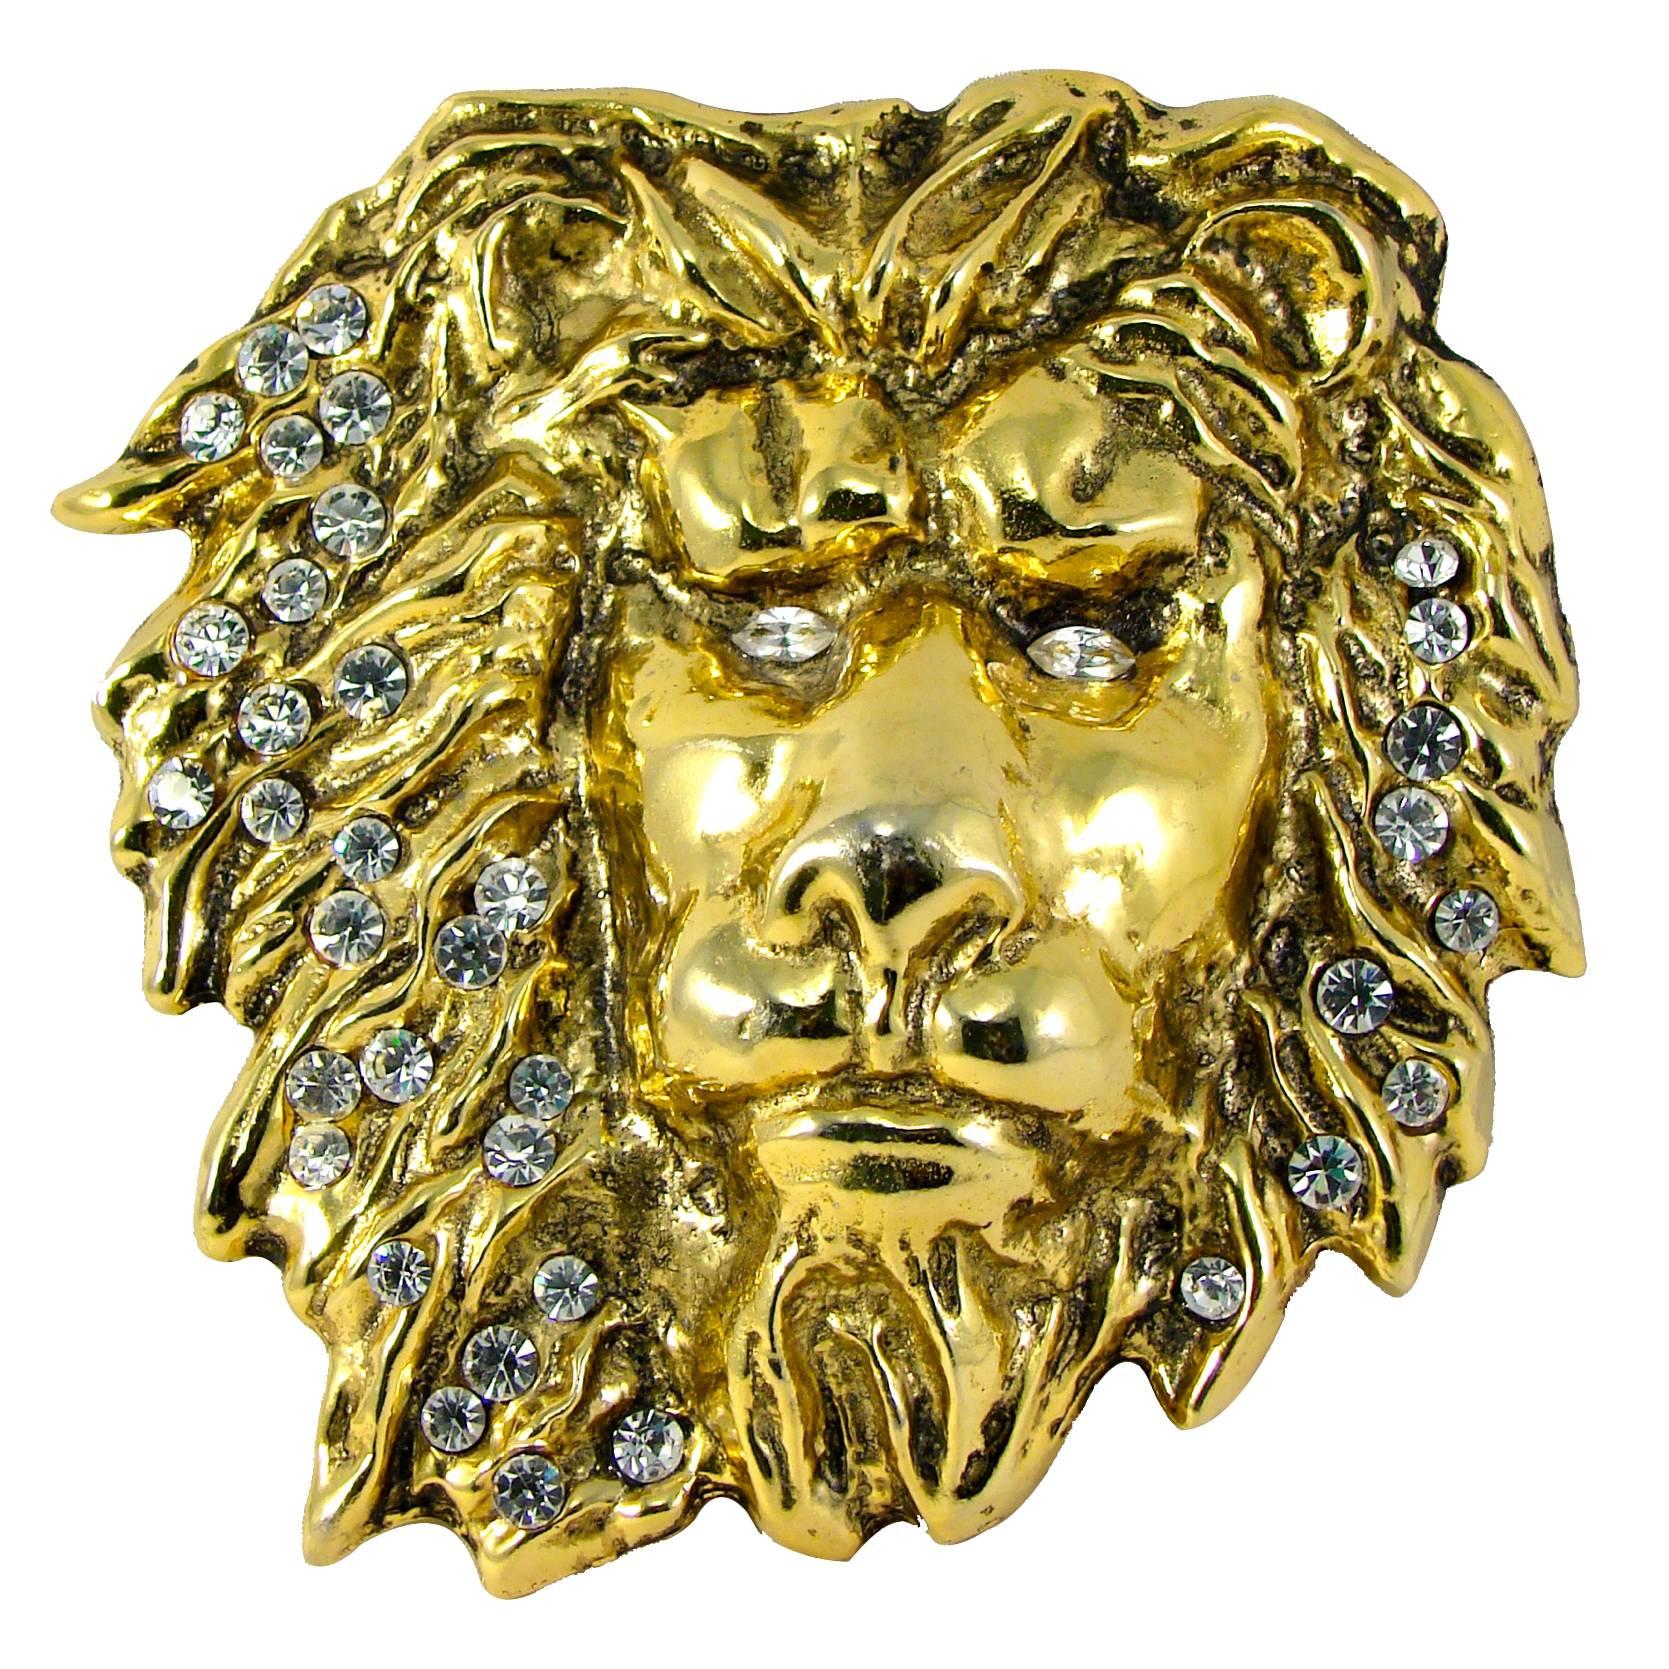 Laloon Large Figural Gold Metal Lion Head Belt Buckle with Rhinestones 1980s 